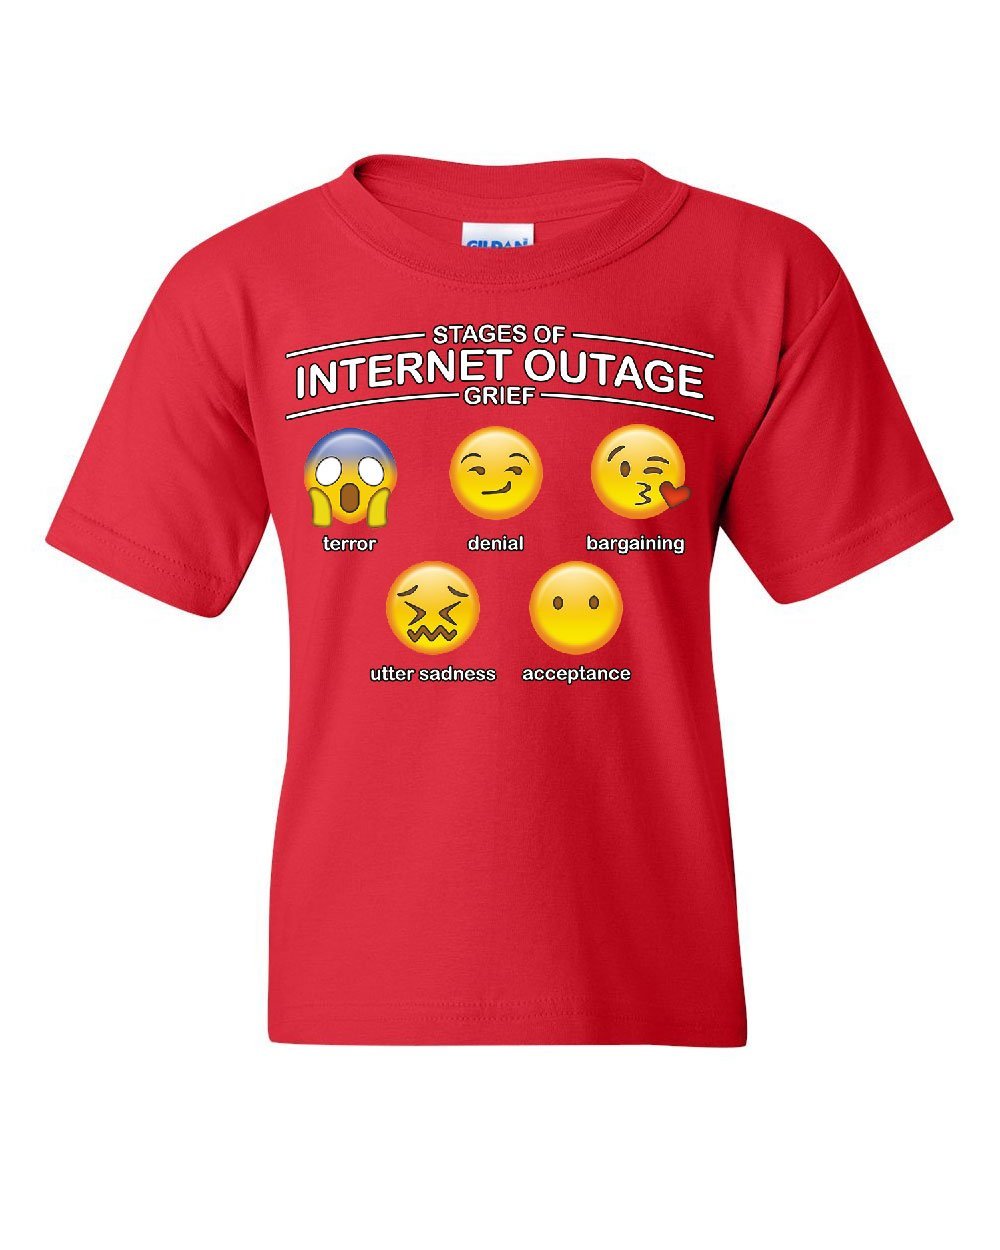 Tee Hunt Stages of Internet Outage Grief Muscle Shirt Social Media Online Sleeveless 